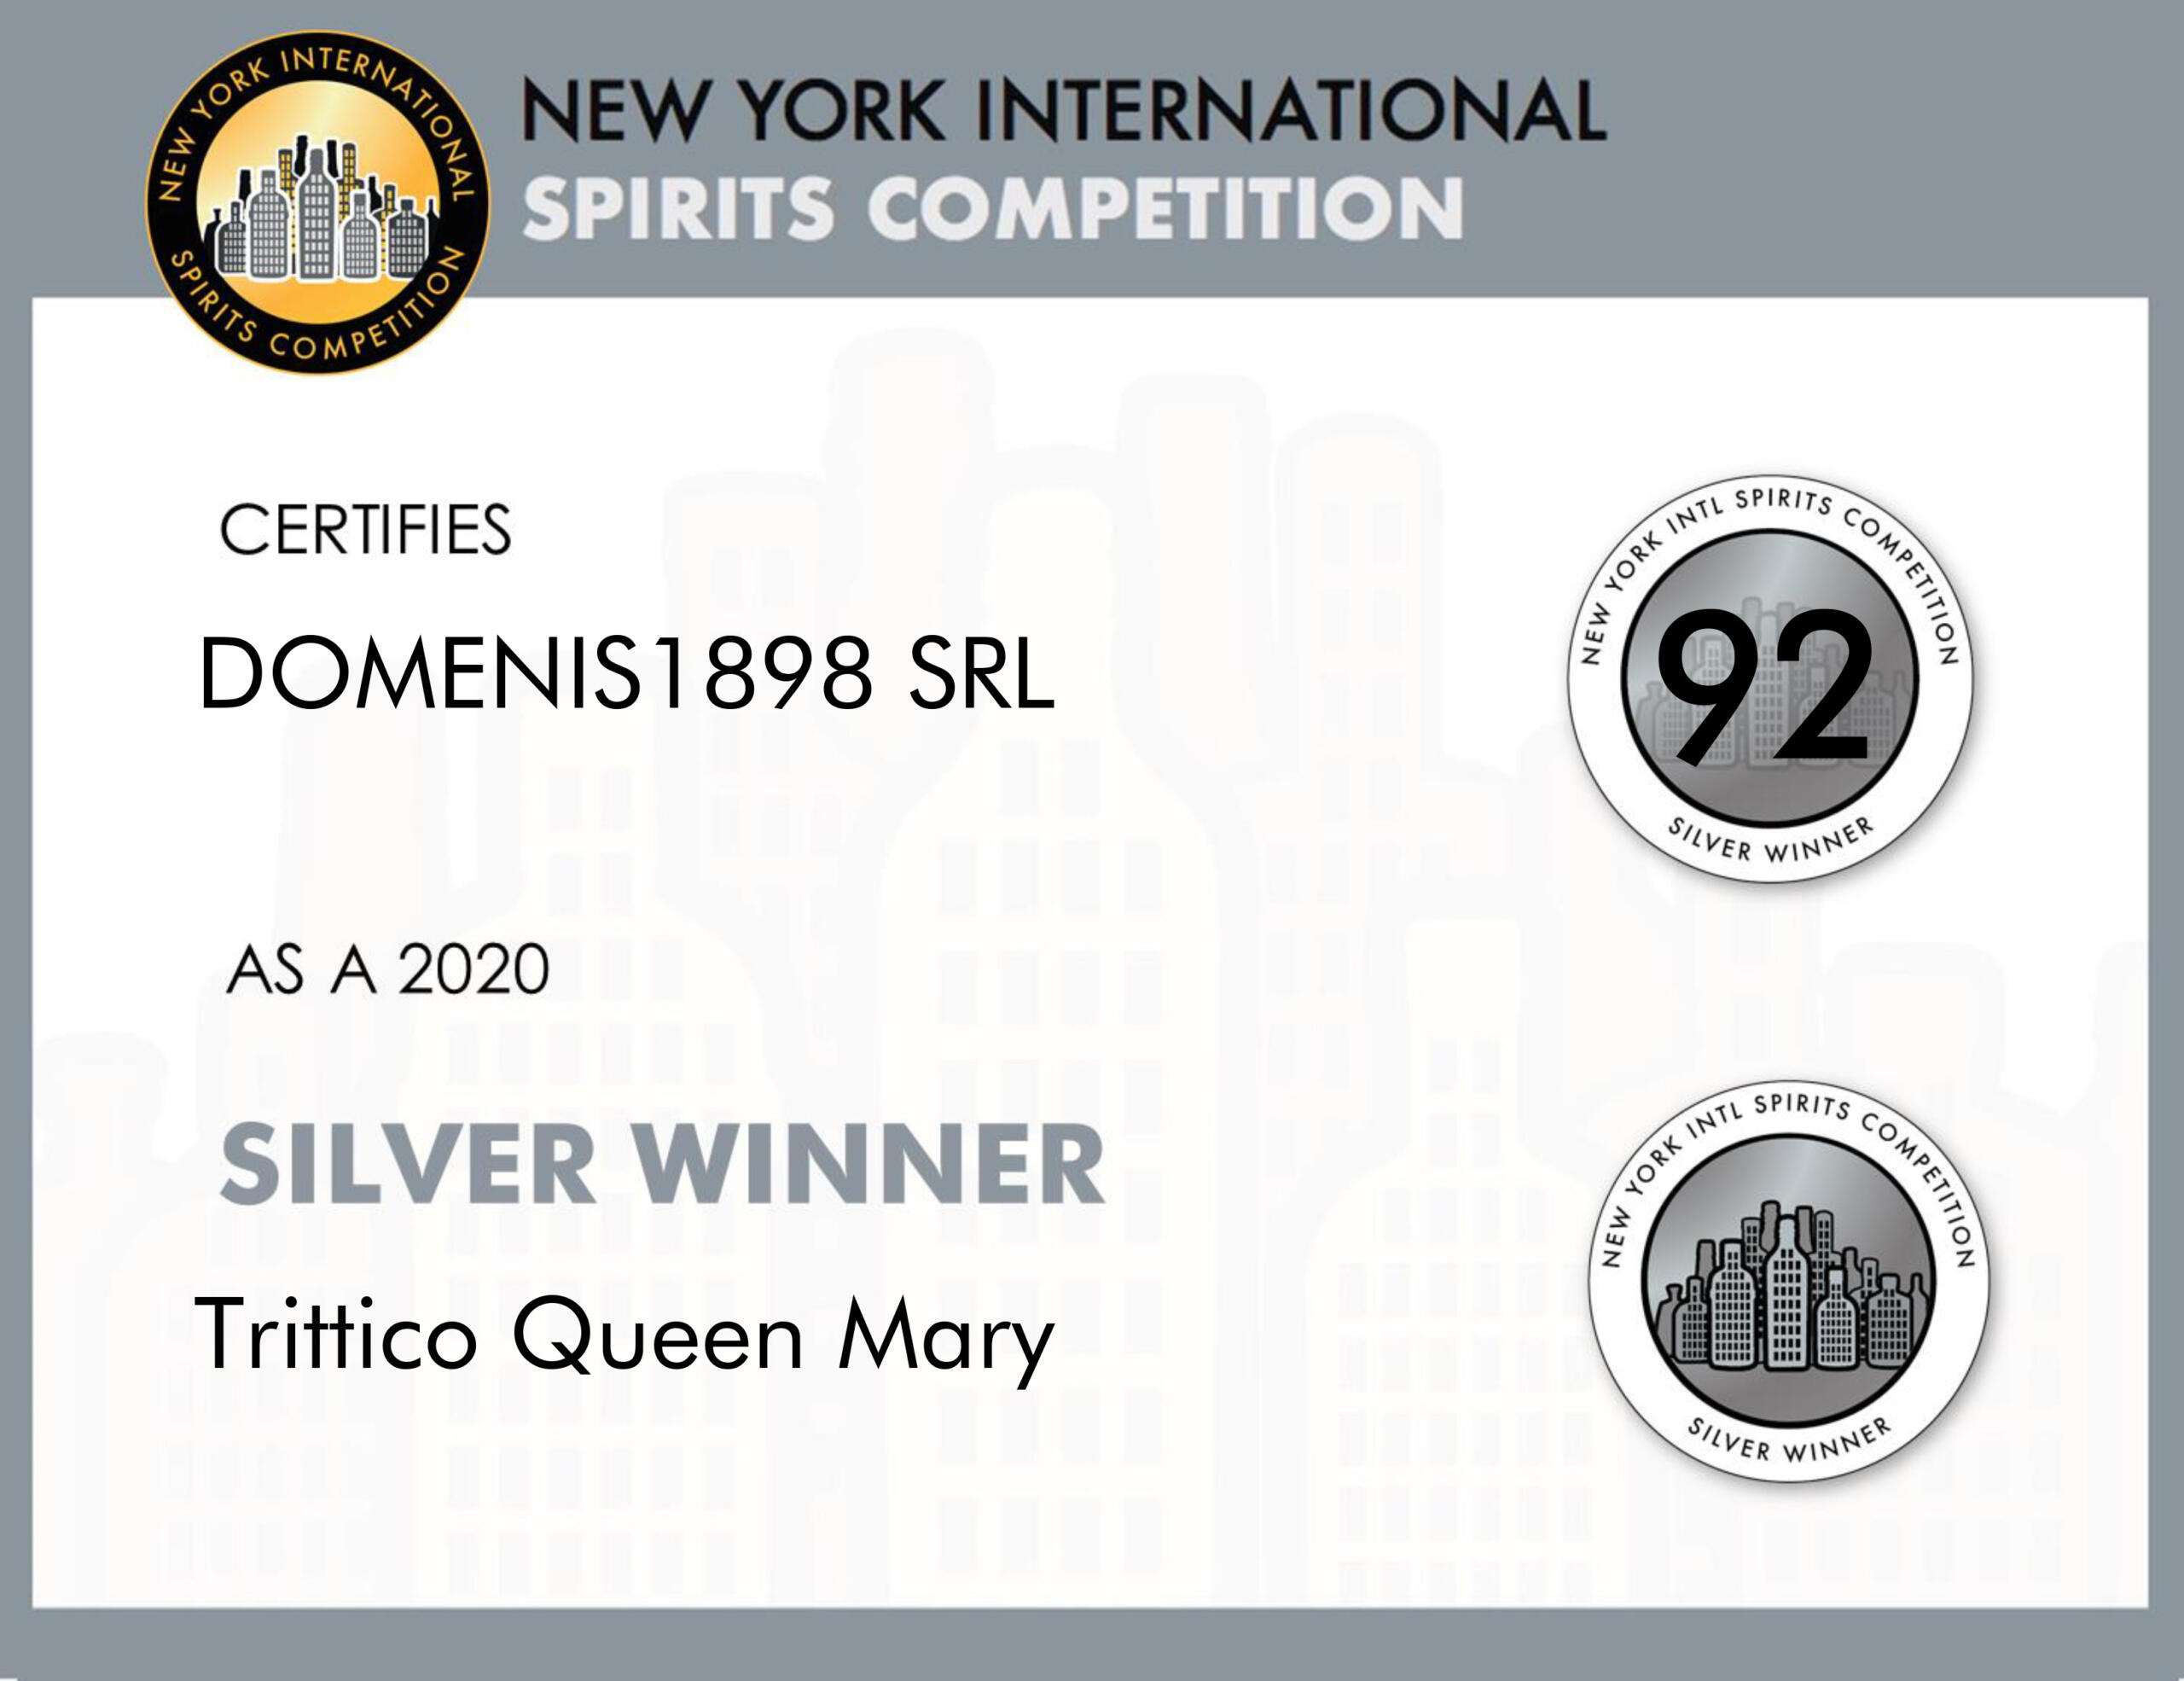 New York Intl Spirits Competition 2020 – Silver Winner – Trittico Queen Mary